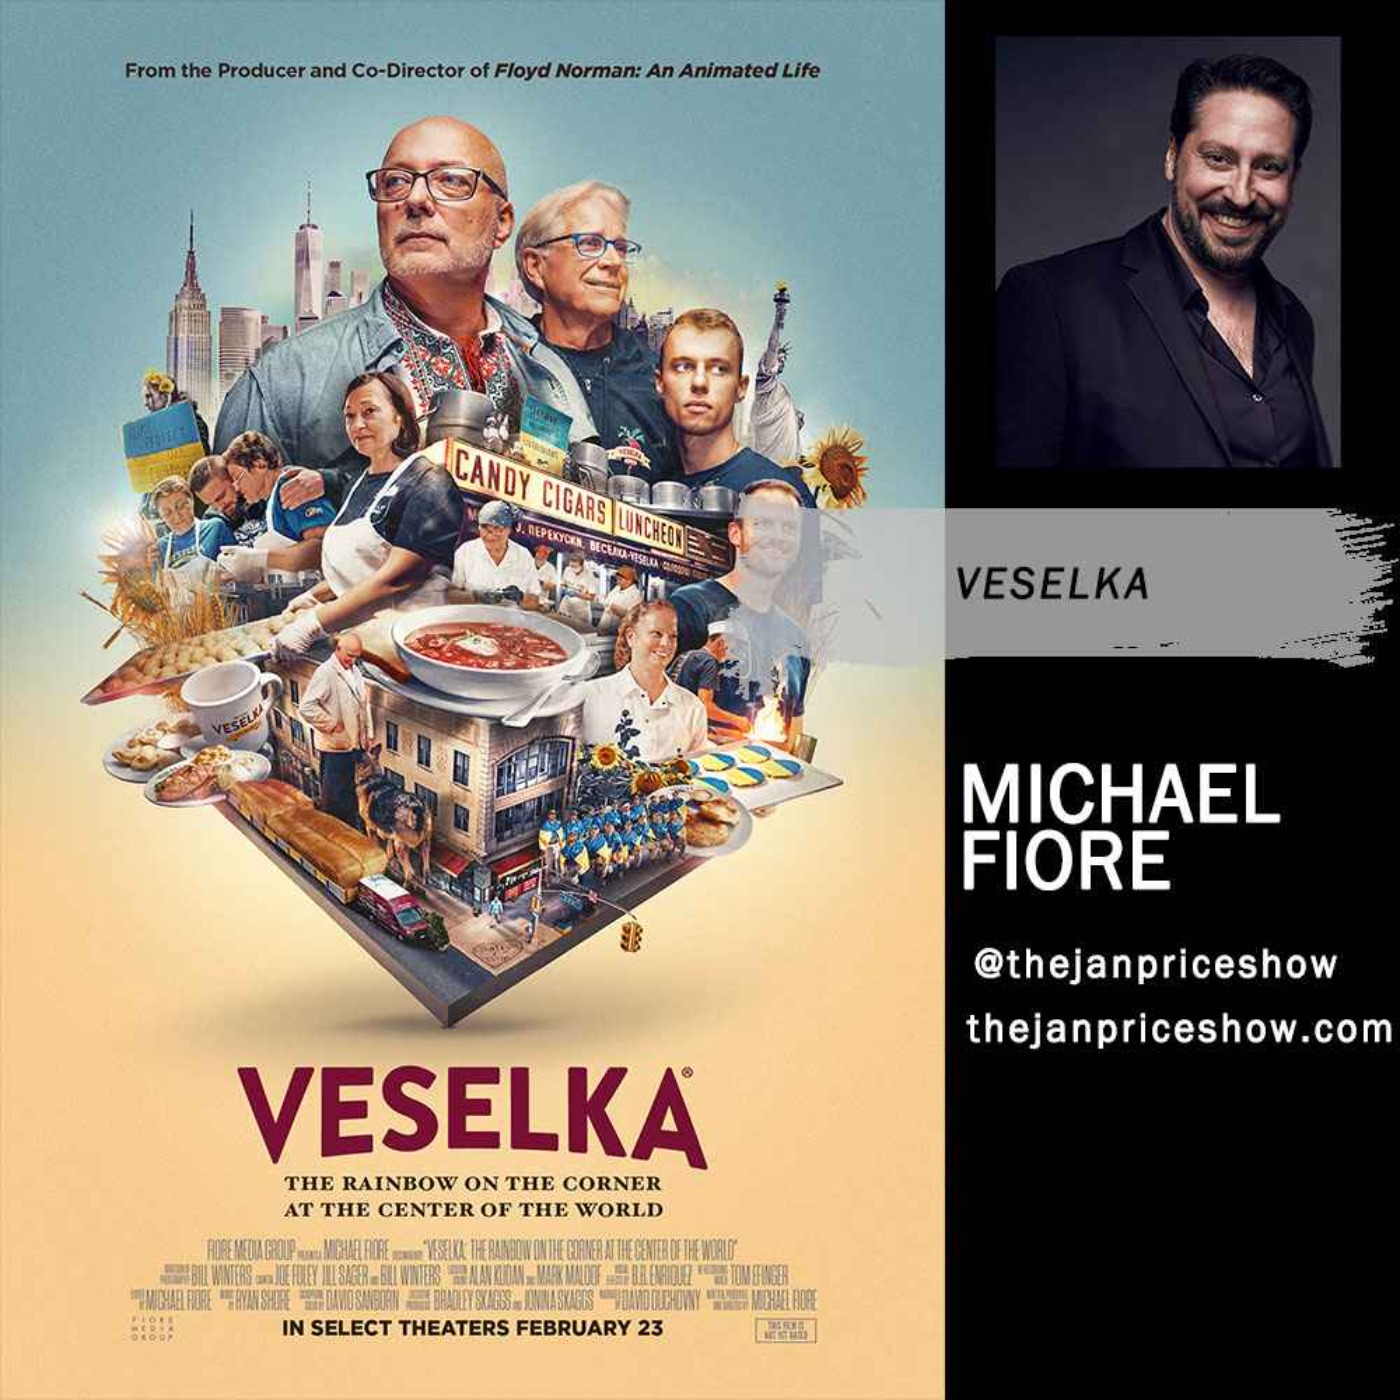 Michael Fiore - Veselka: The Rainbow on the Corner at the Center of the World